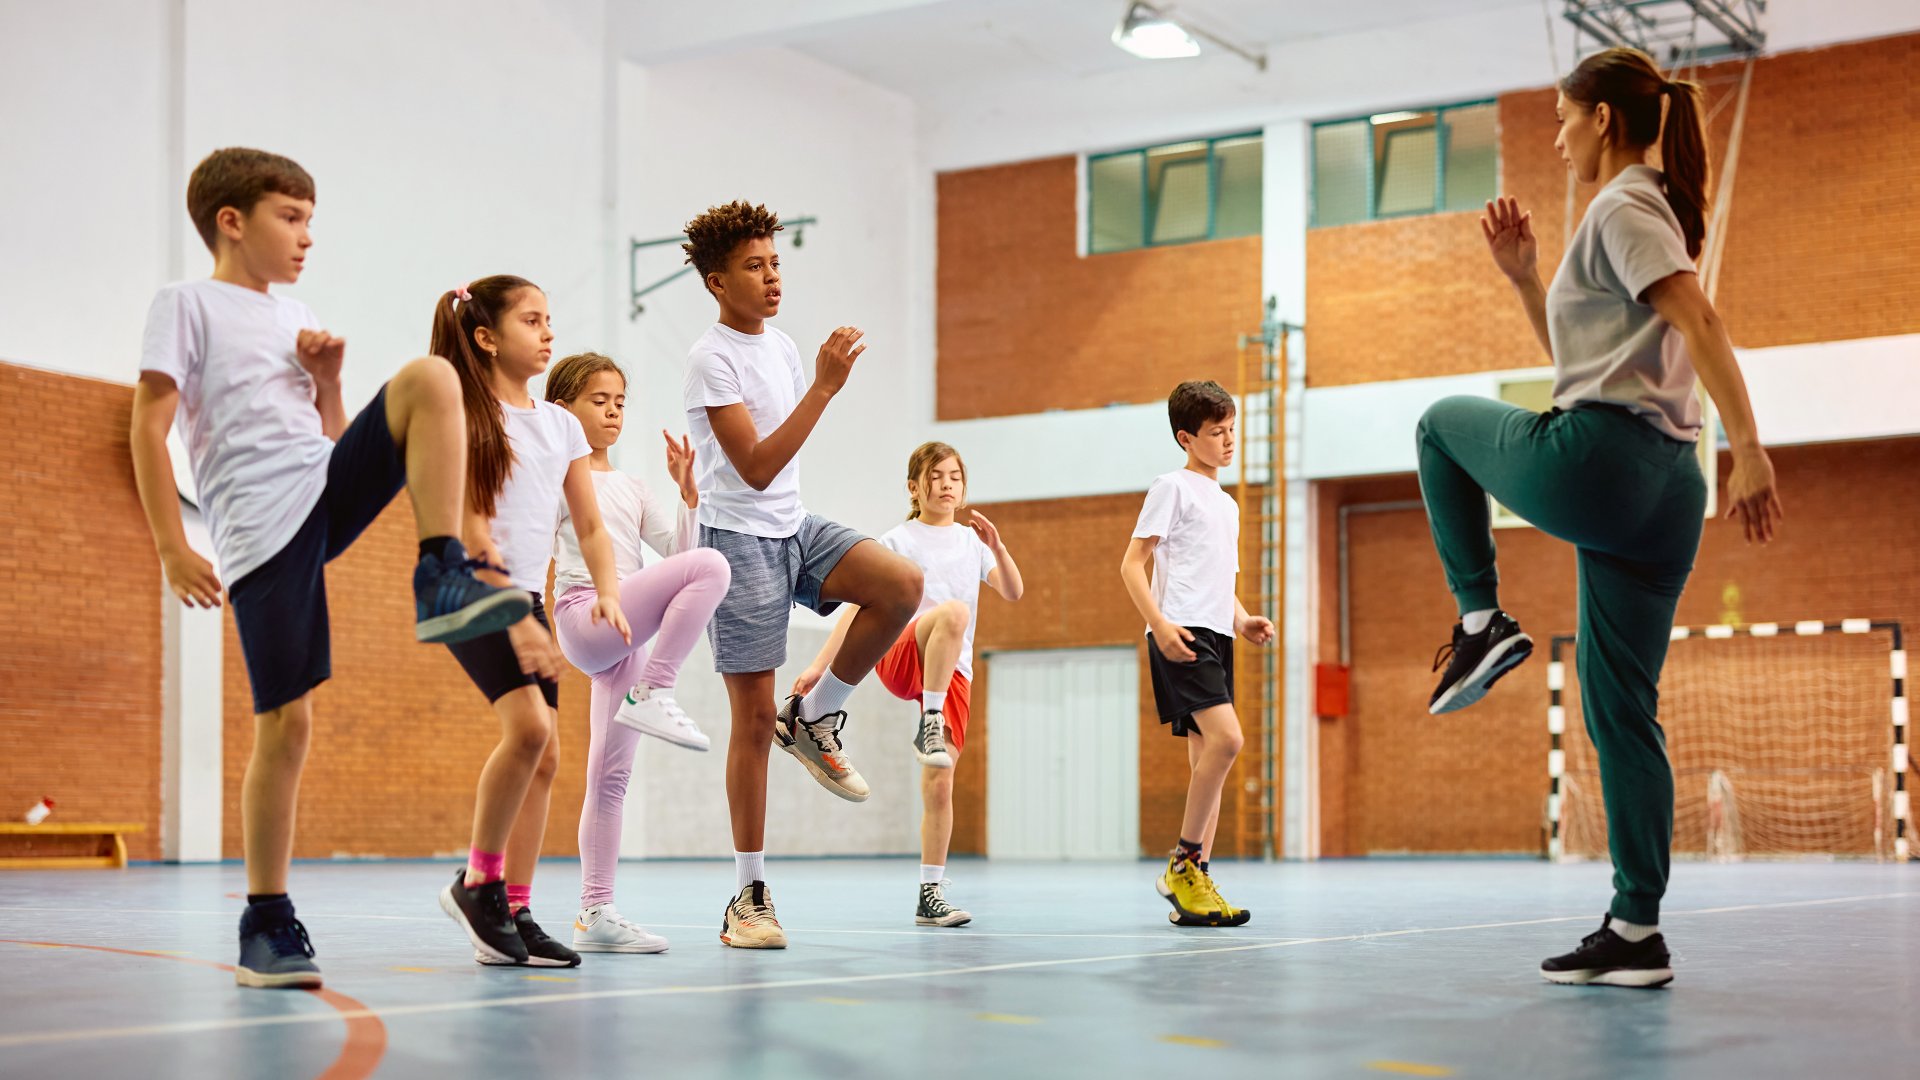 Should we be using fitness testing in schools?